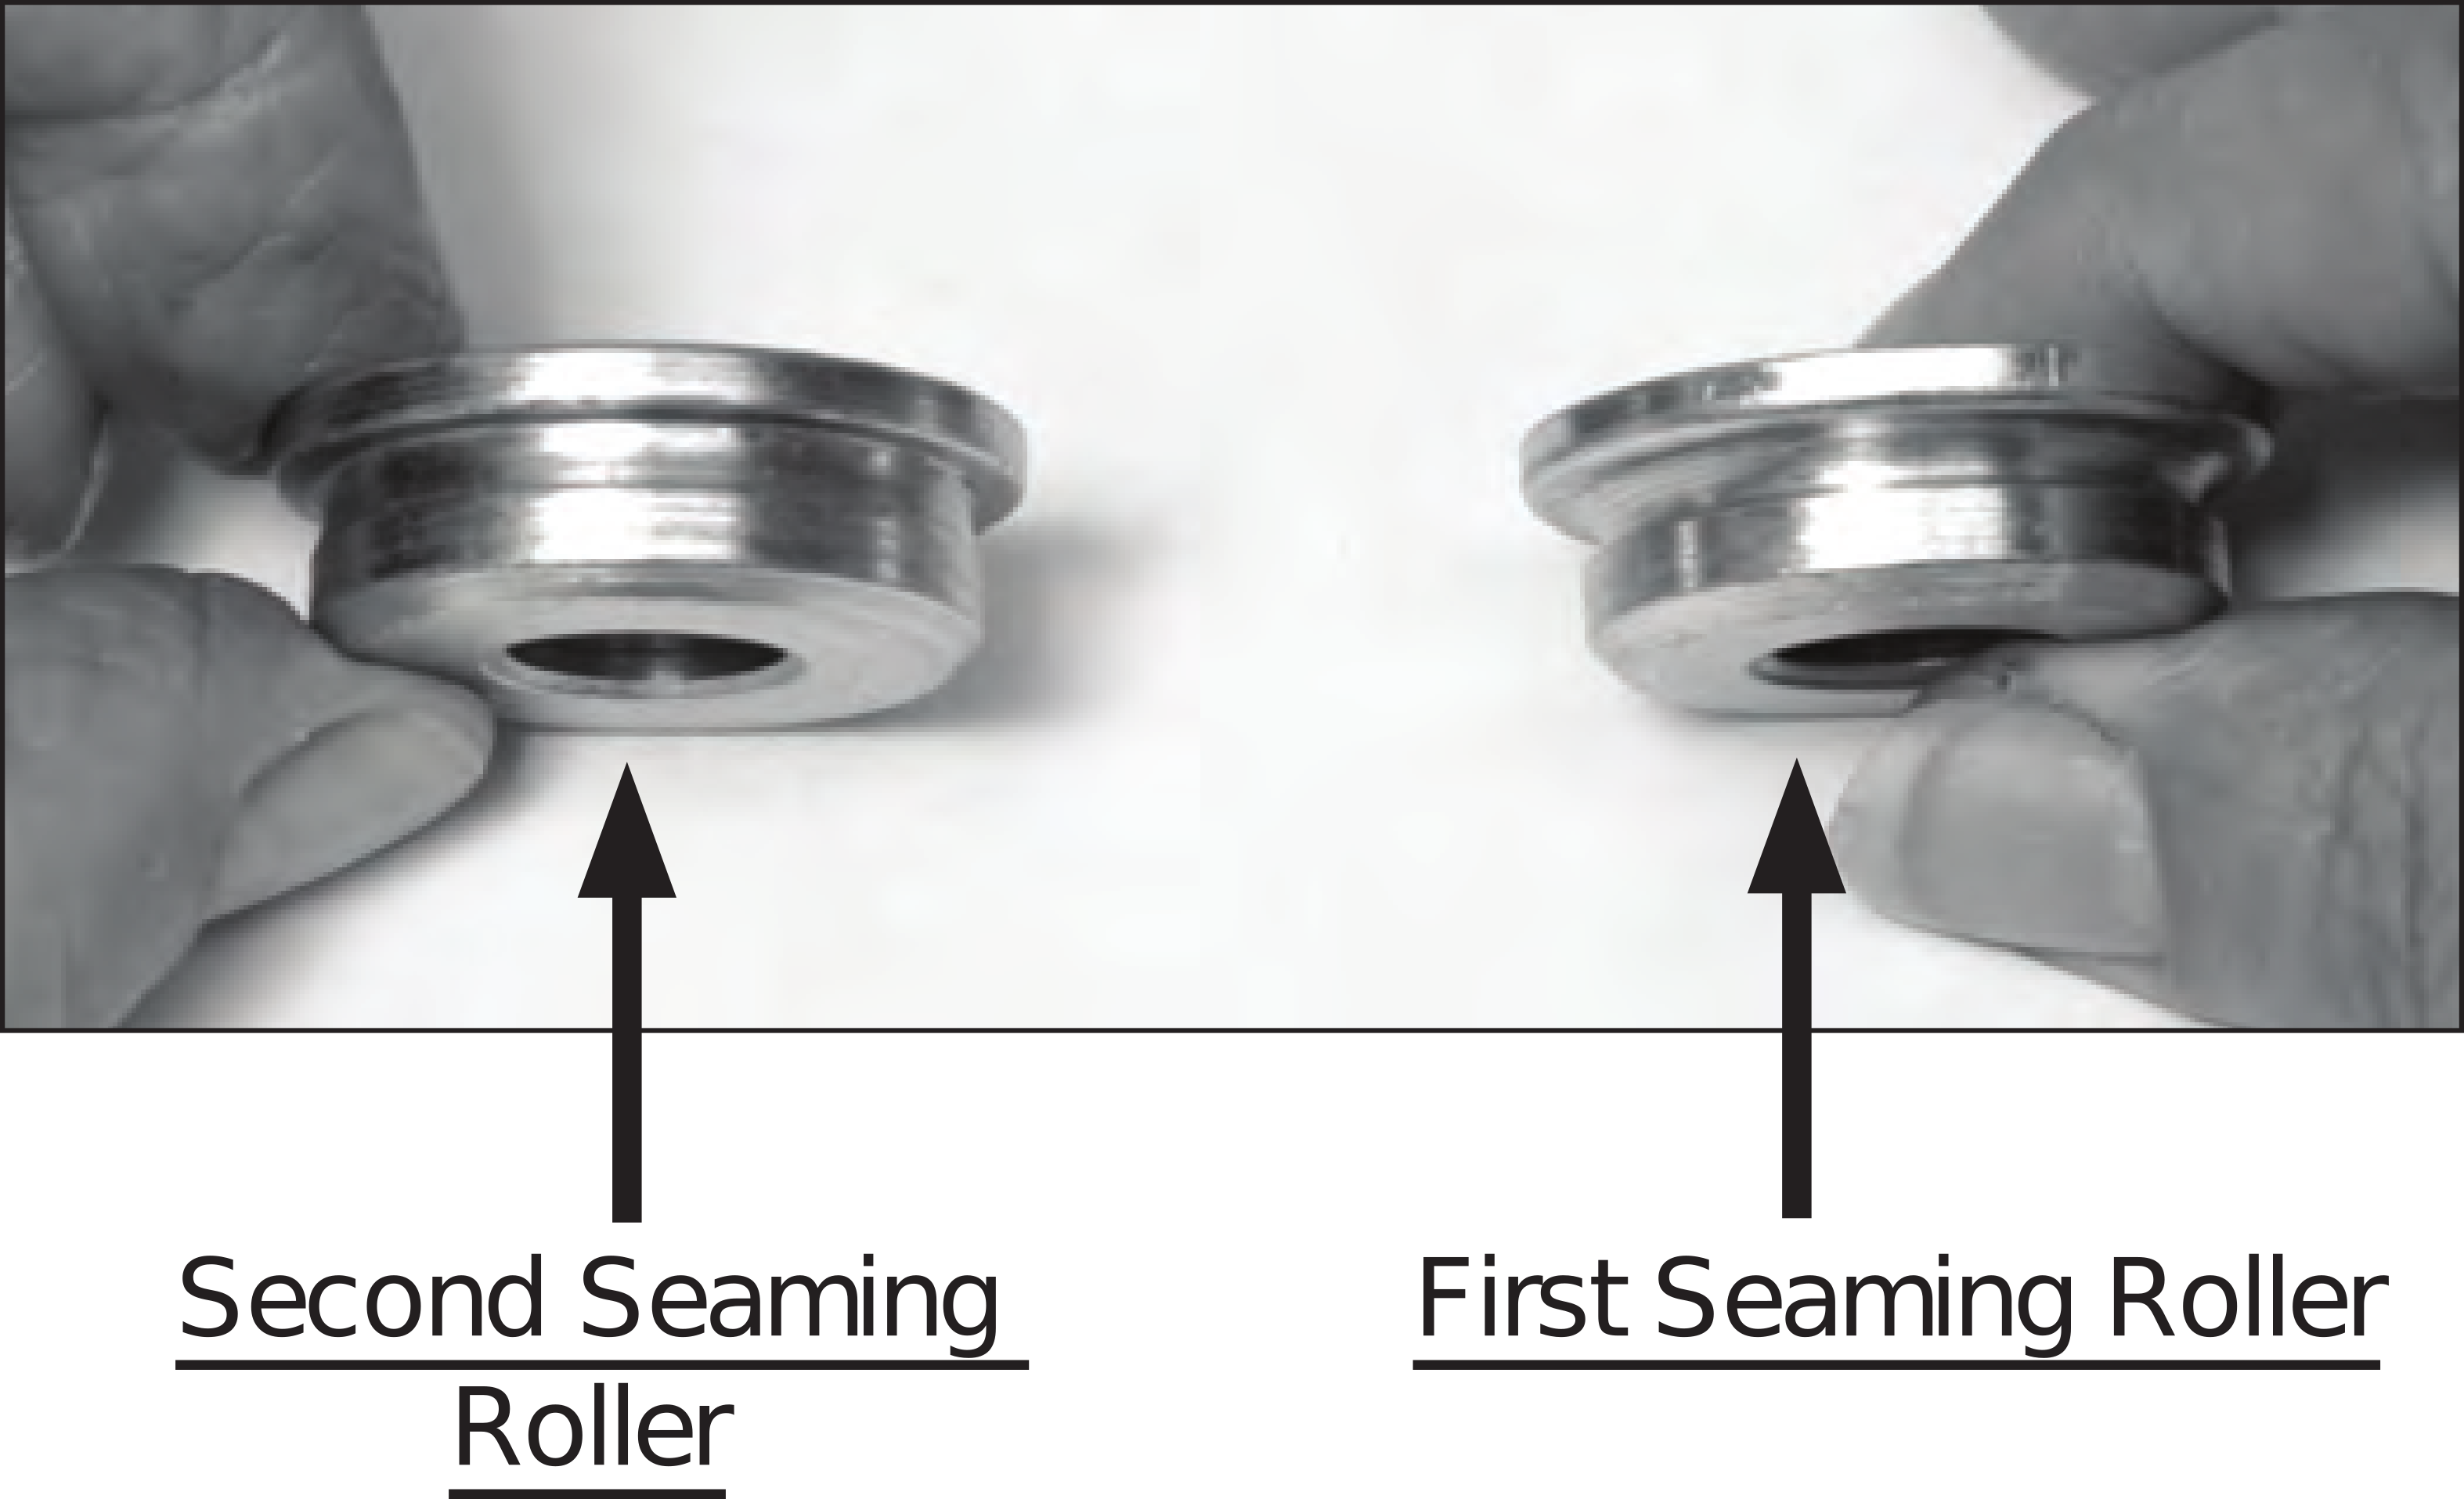 Identifying the rollers